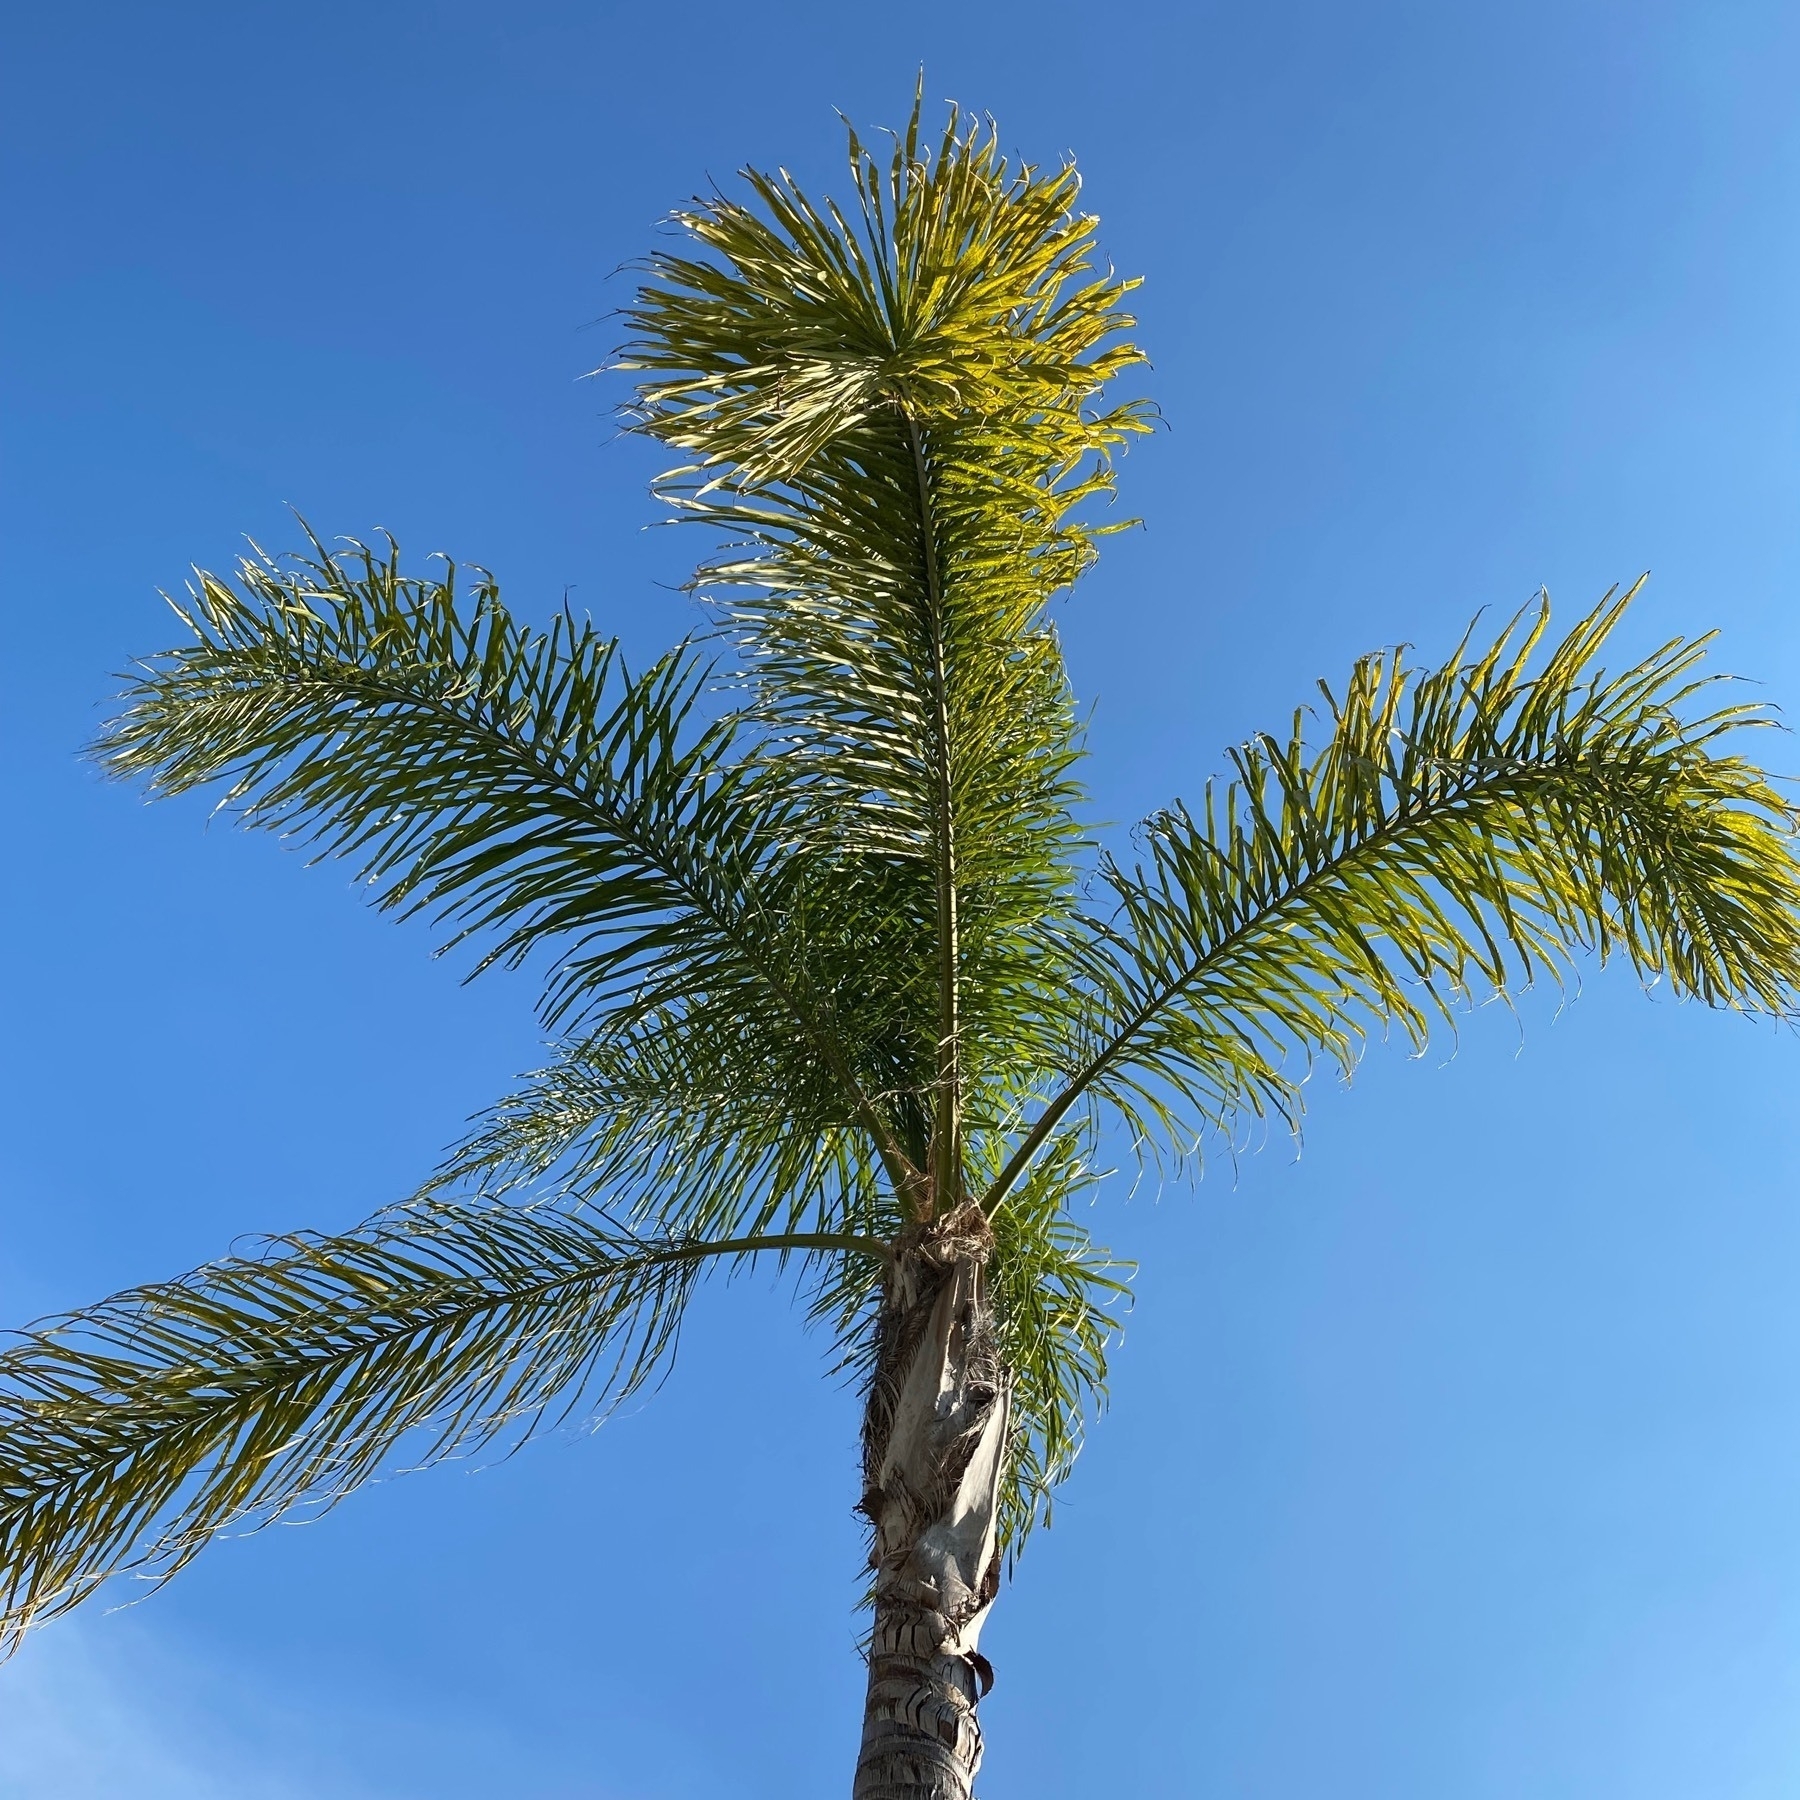 Top of a palm tree from below against a blue sky.